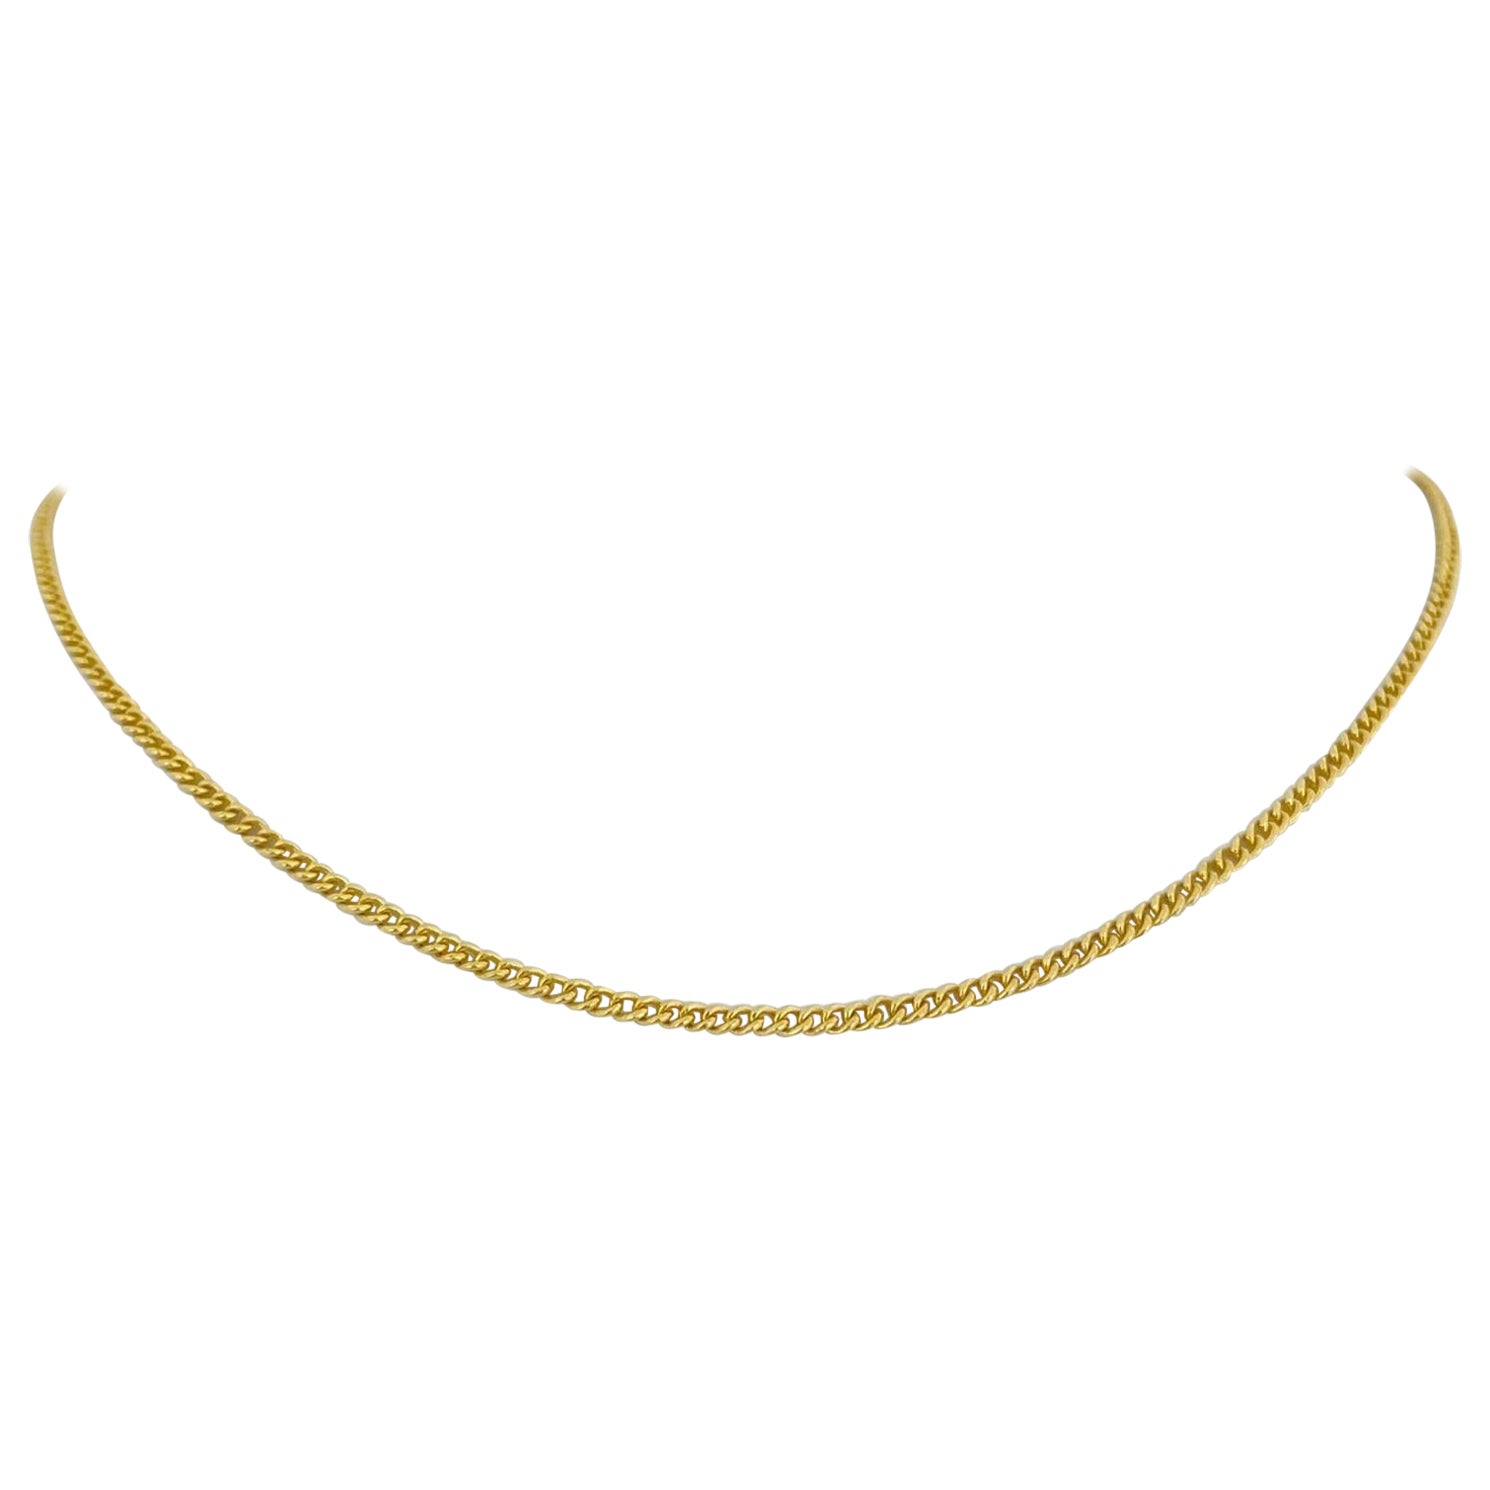 24 Karat Pure Yellow Gold Solid Thin Curb Link Chain Necklace 